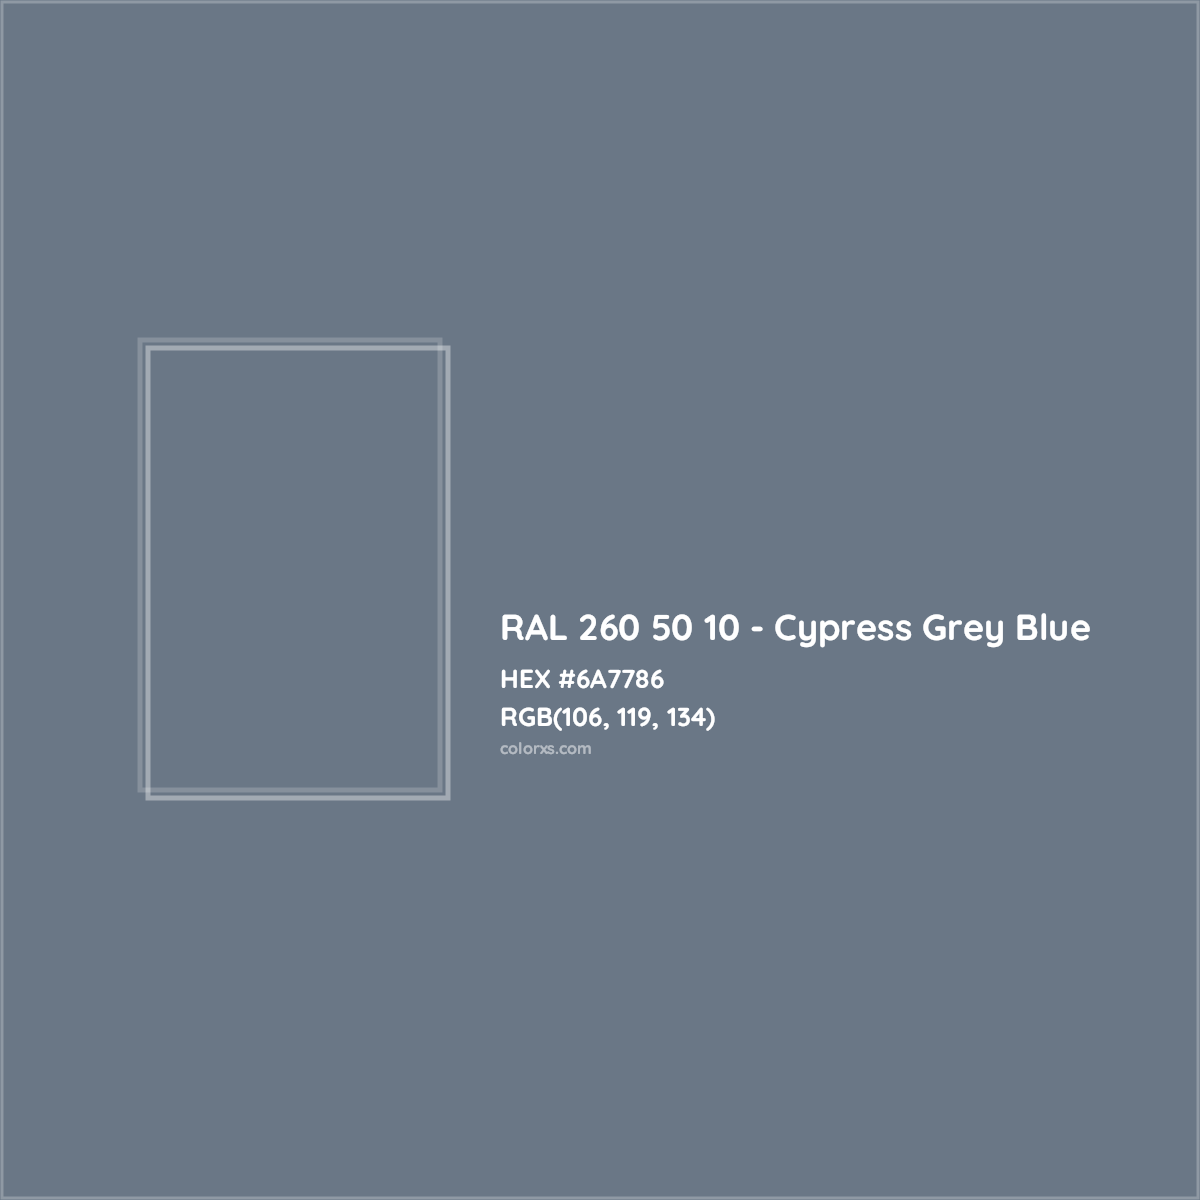 HEX #6A7786 RAL 260 50 10 - Cypress Grey Blue CMS RAL Design - Color Code